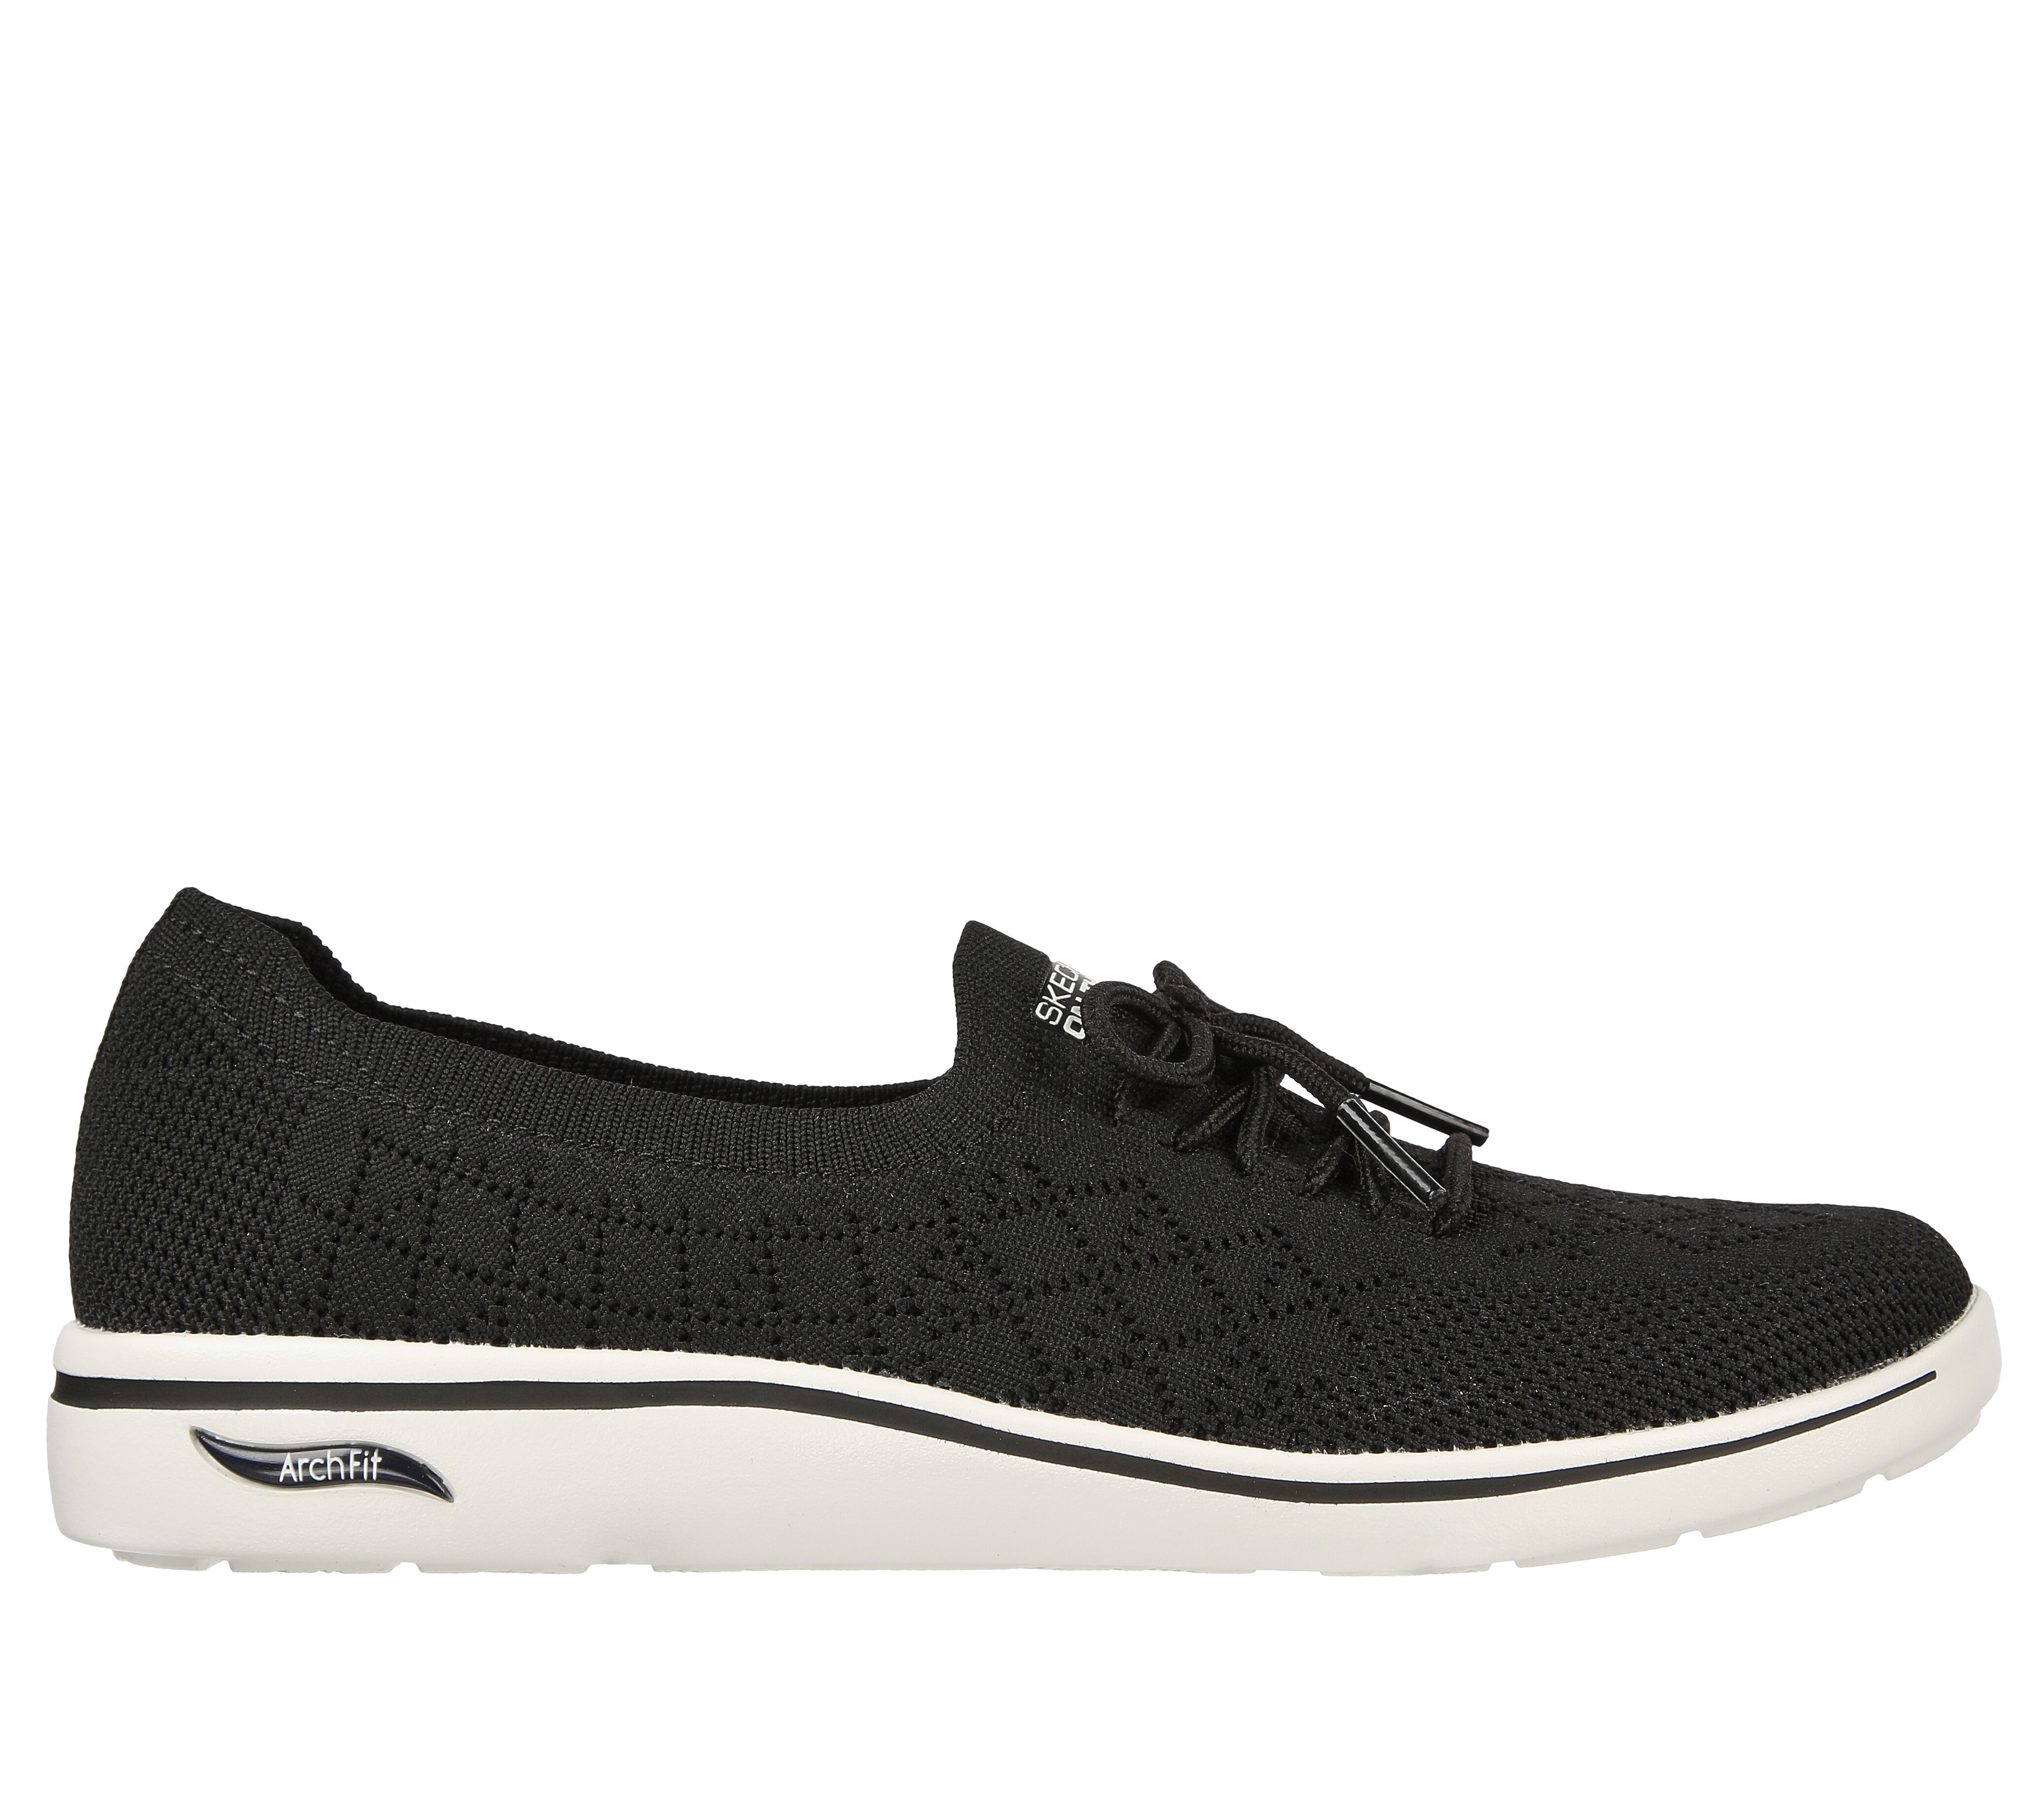 Skechers Arch Fit Uplift - Perfect Dreams